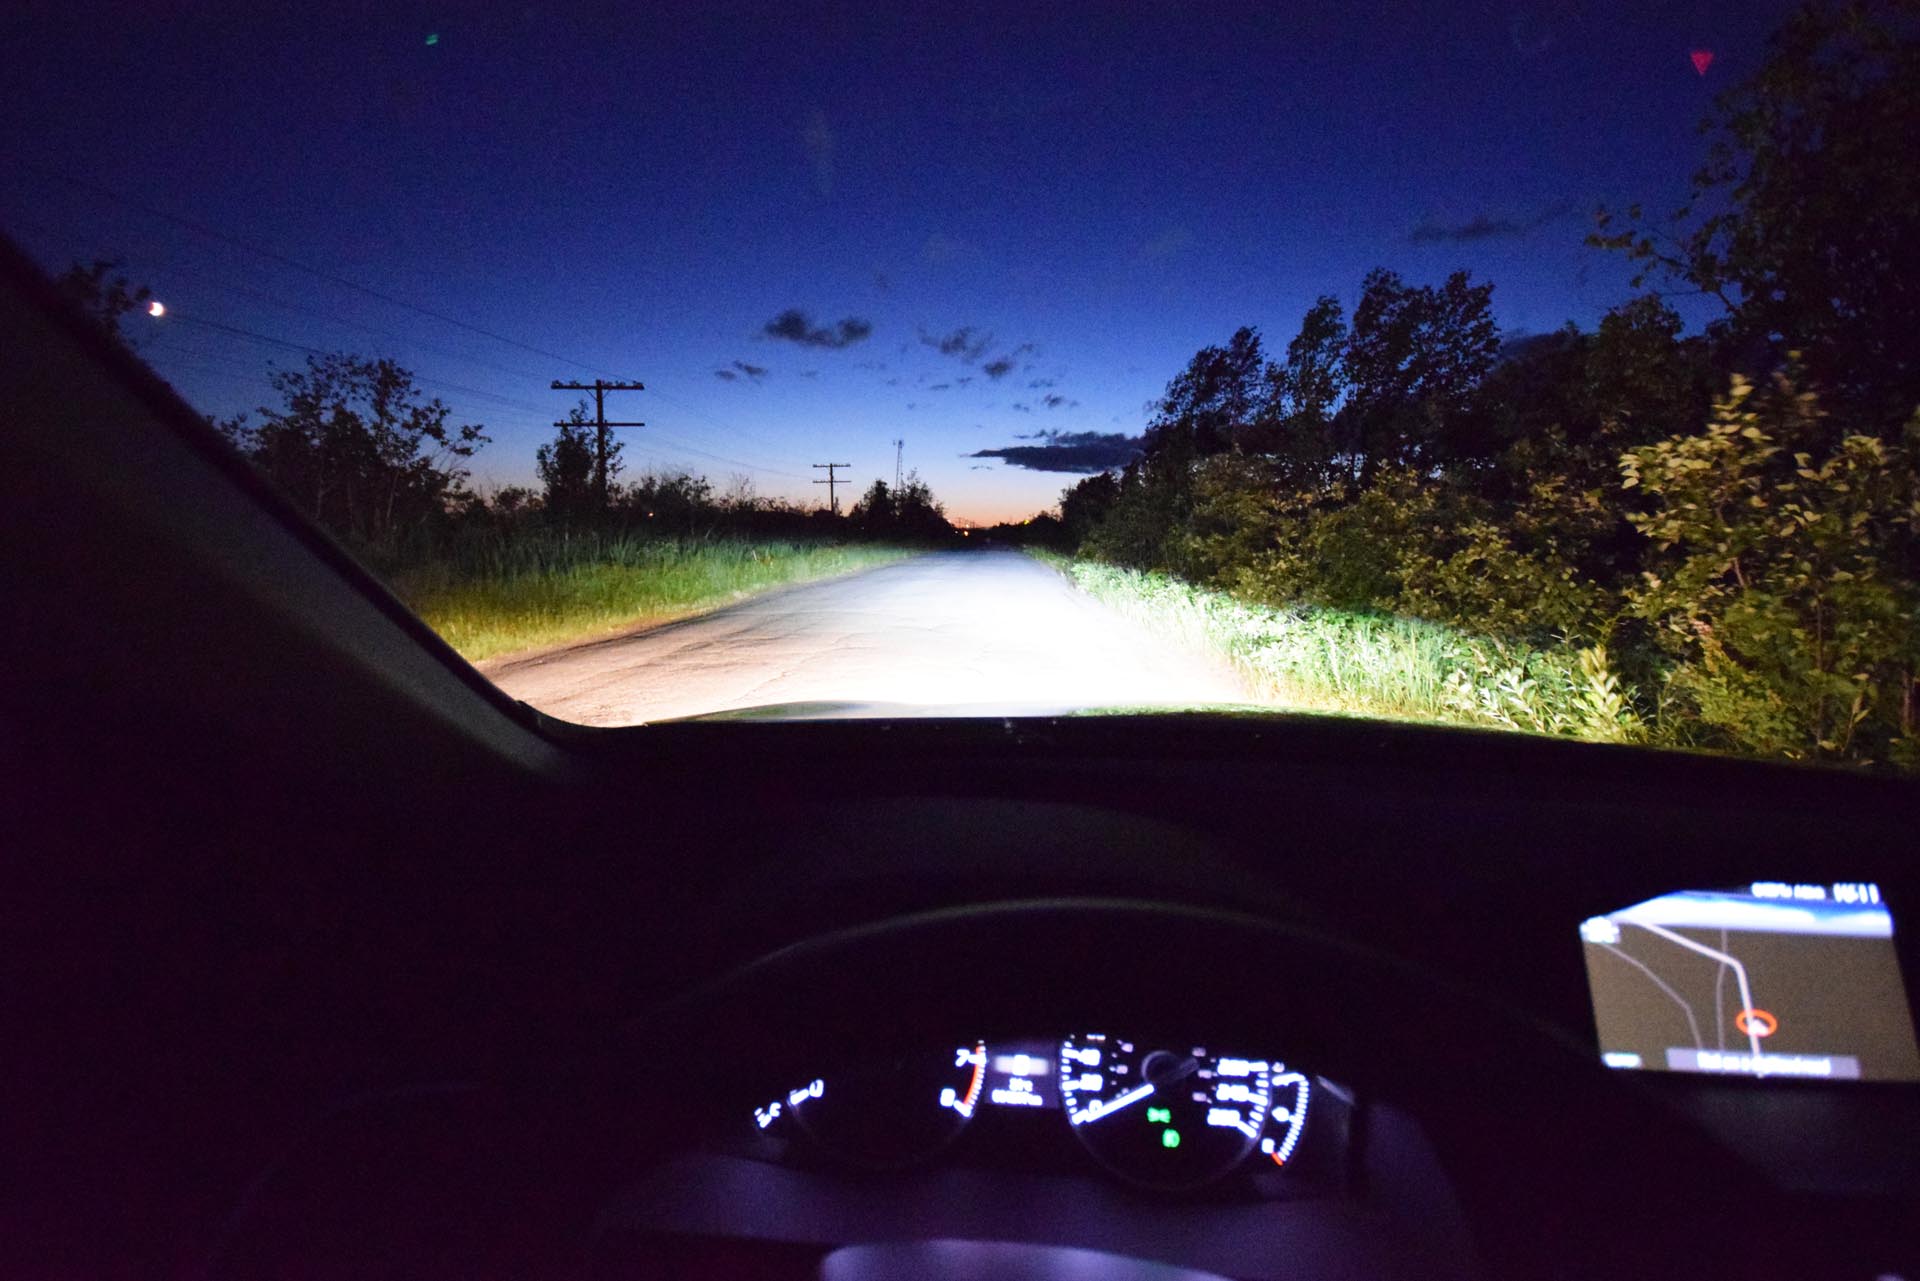 Here’s a visualization of the lighting output from Acura’s LED lighting system, in the new RDX. Note the thick saturation, brilliant cut-off line, minimal dark spots, and peripheral lighting which extends well off of the roadway.